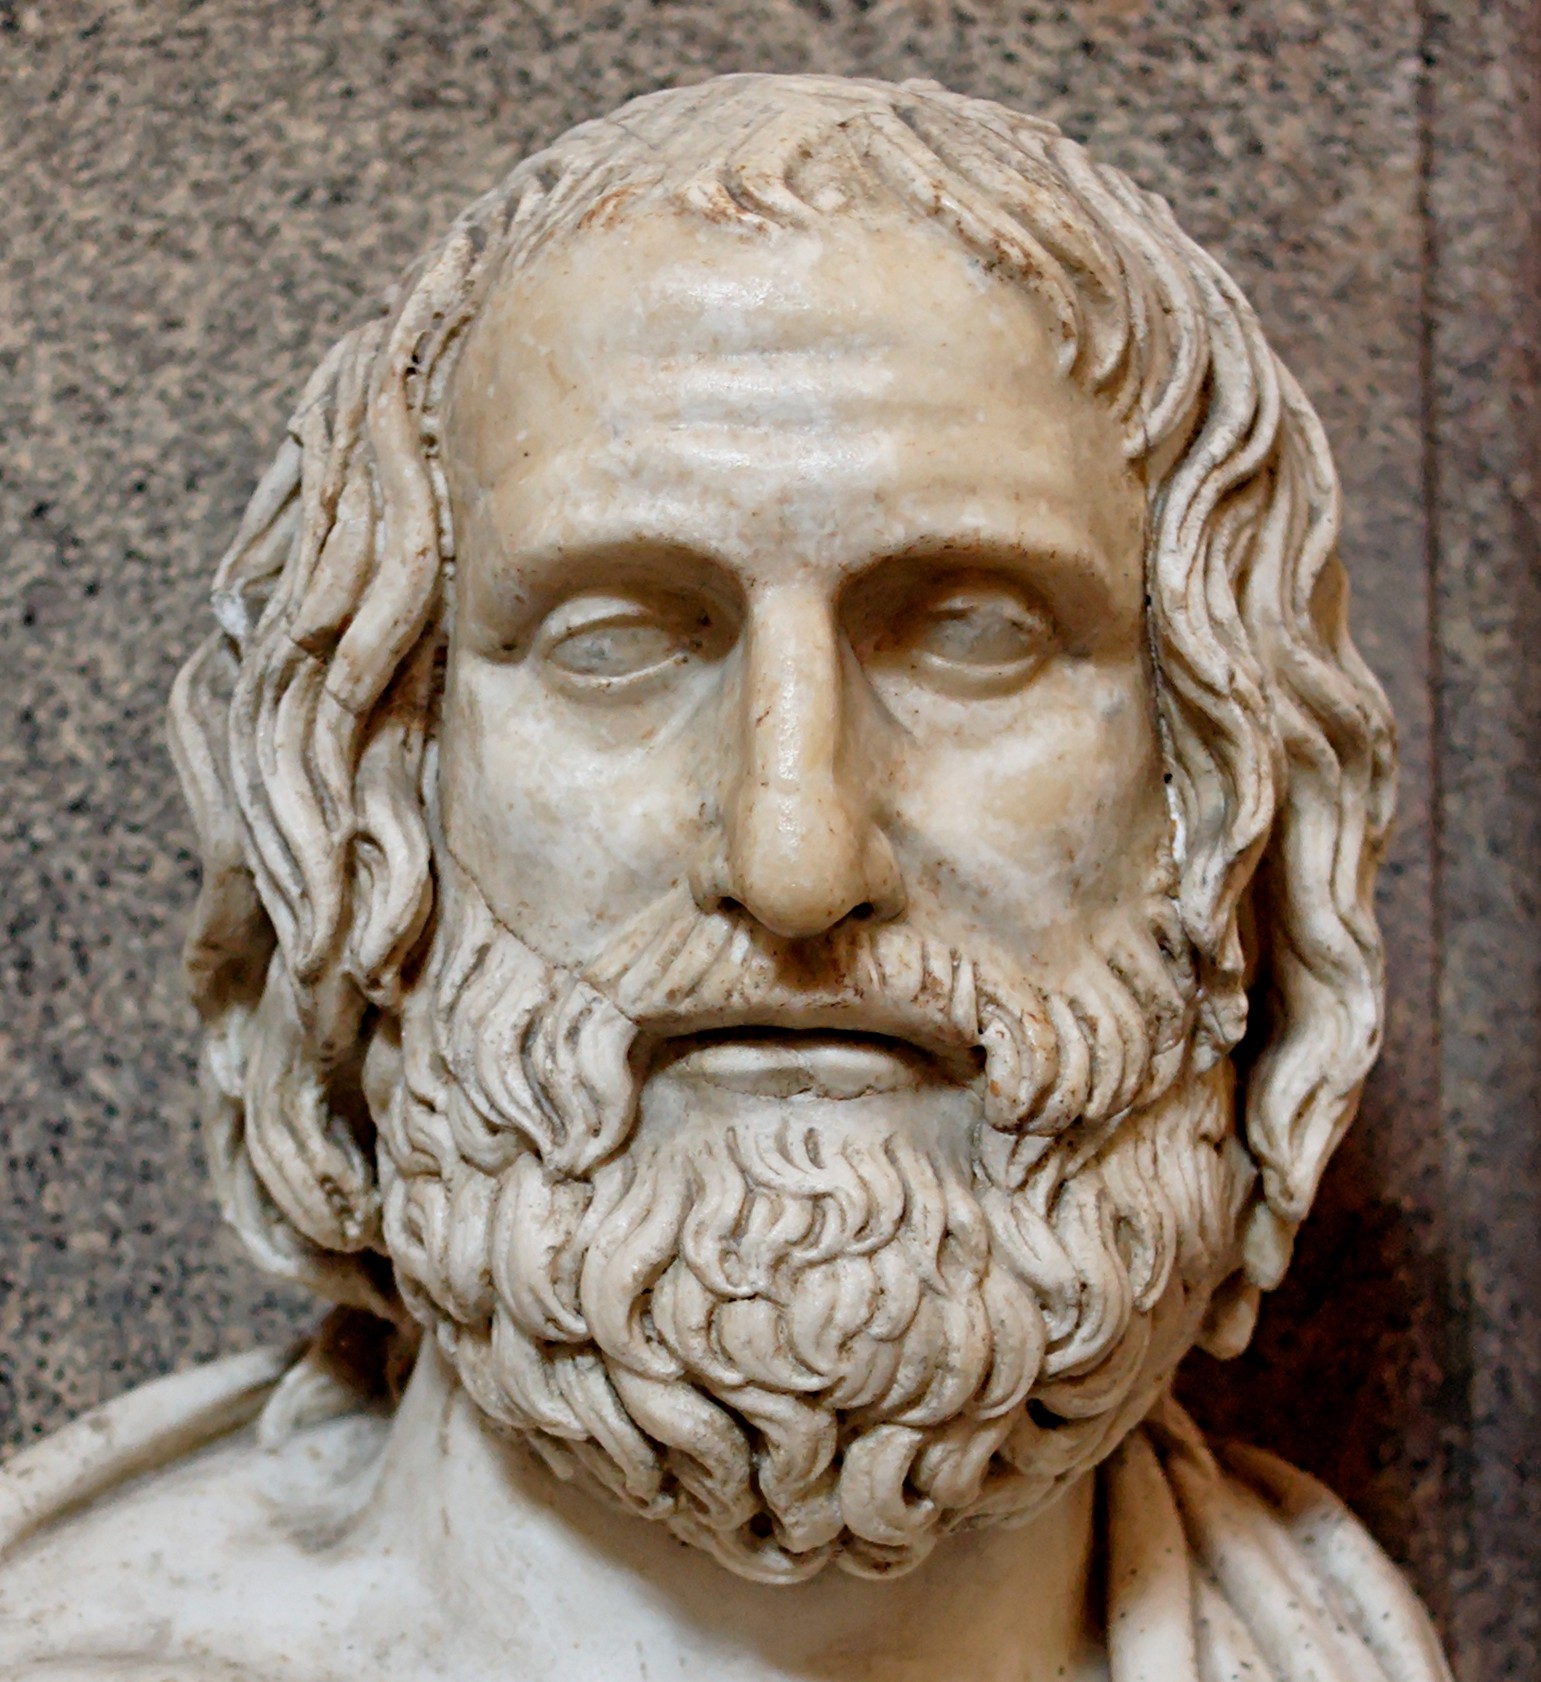 Euripides, a controversial figure in his time, raised feminist issues with plays like "Medea" and "The Trojan Women."